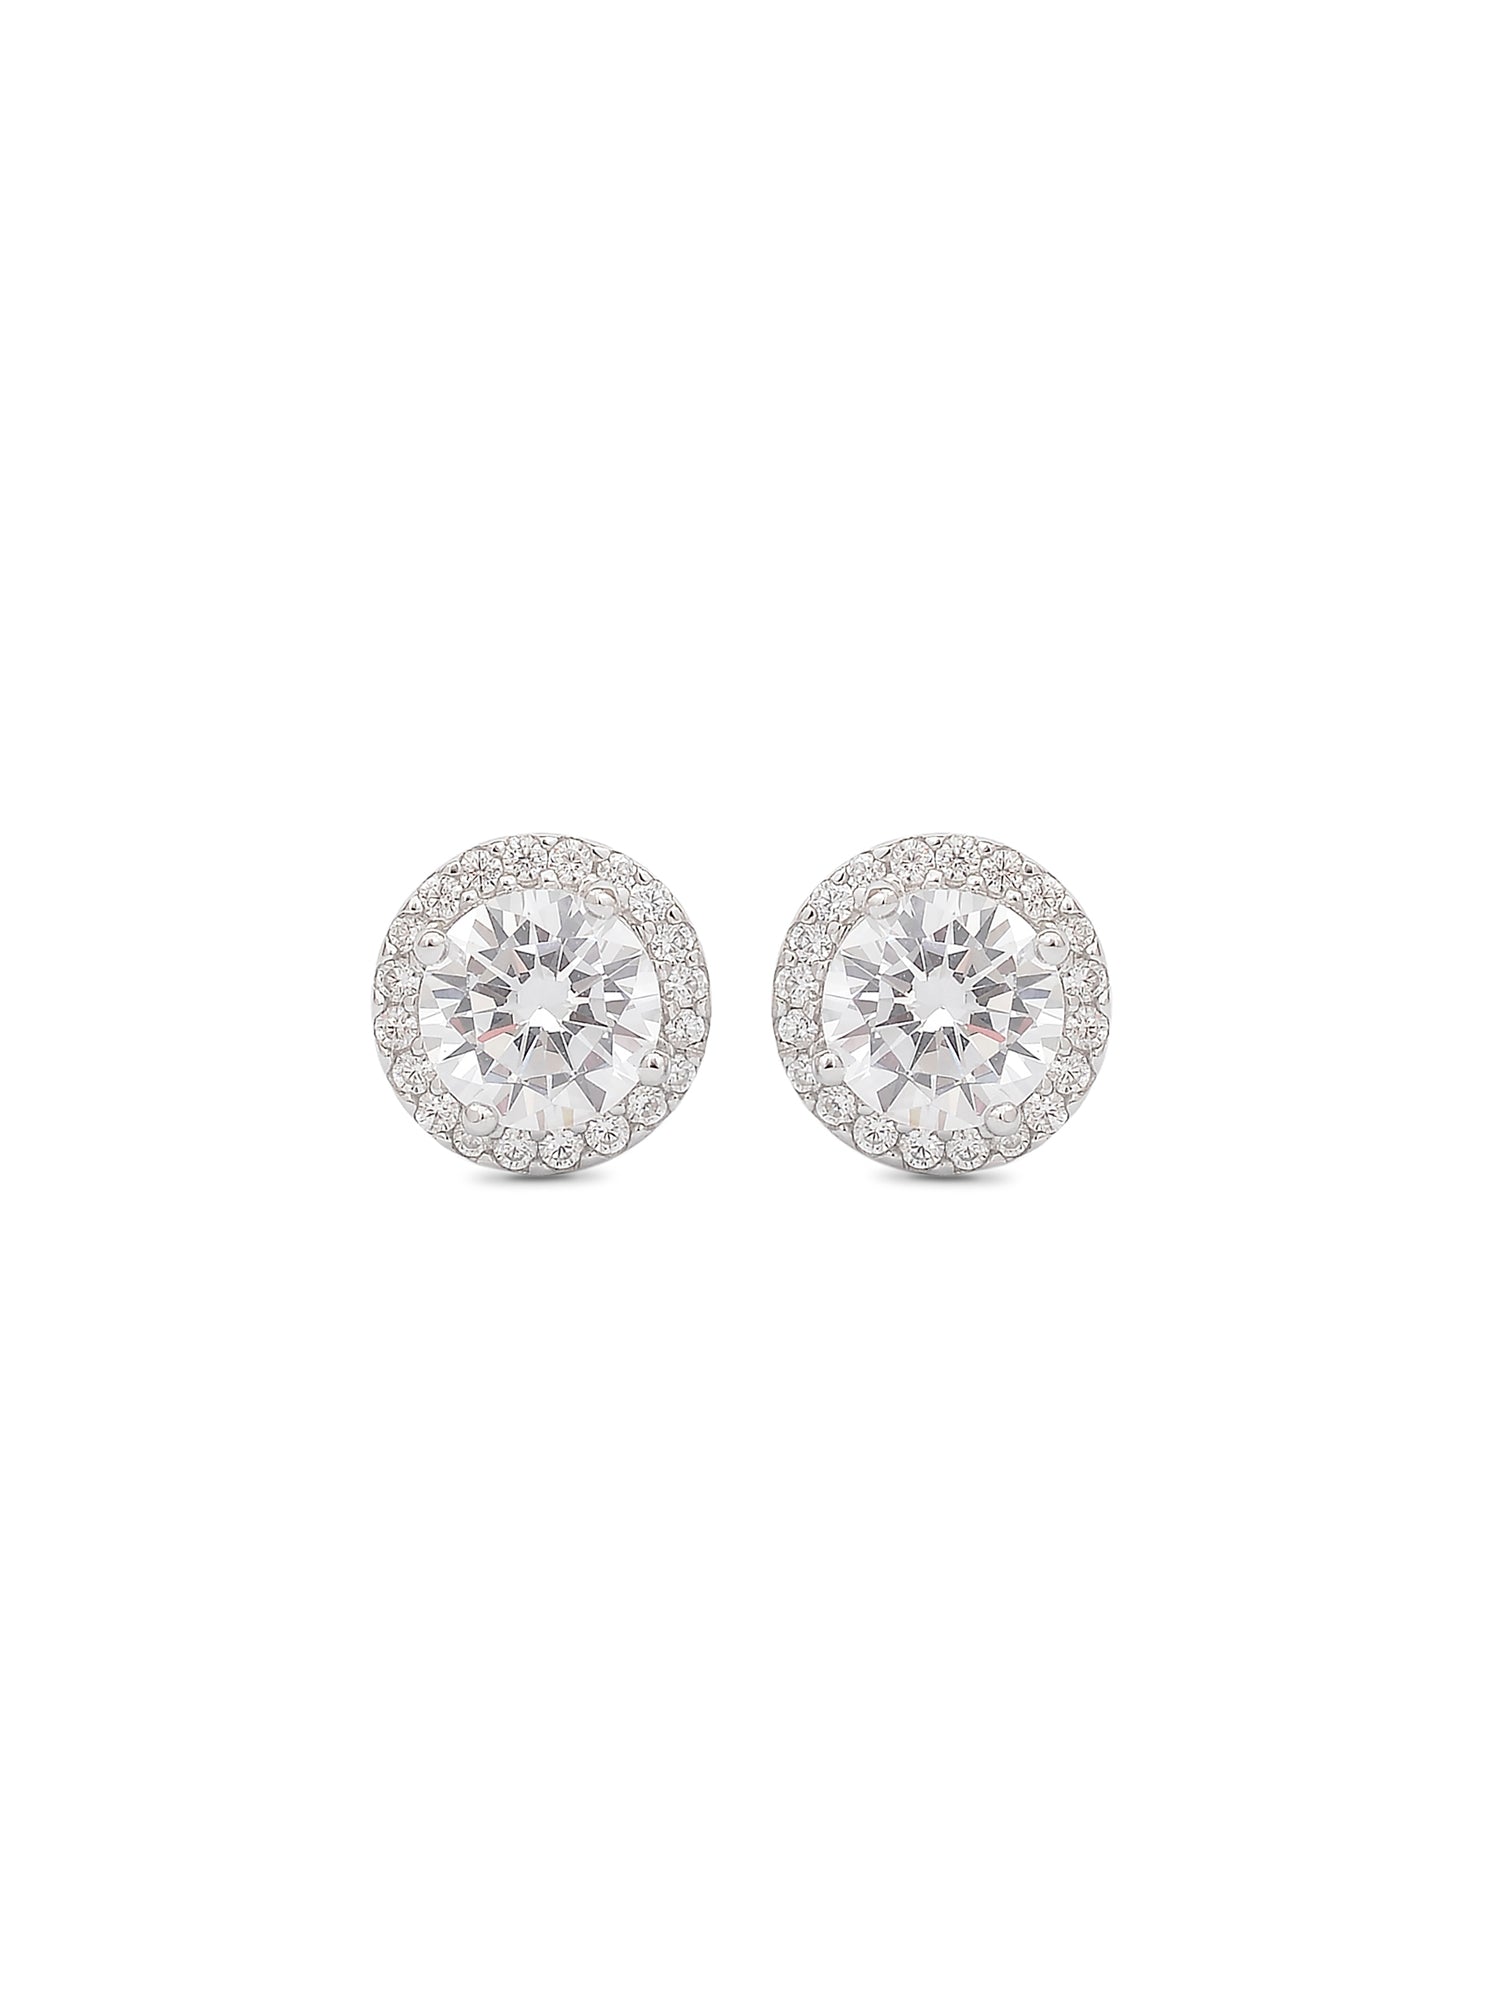 SOLITAIRE HALO PURE SILVER STUD EARRINGS FOR WOMEN-4